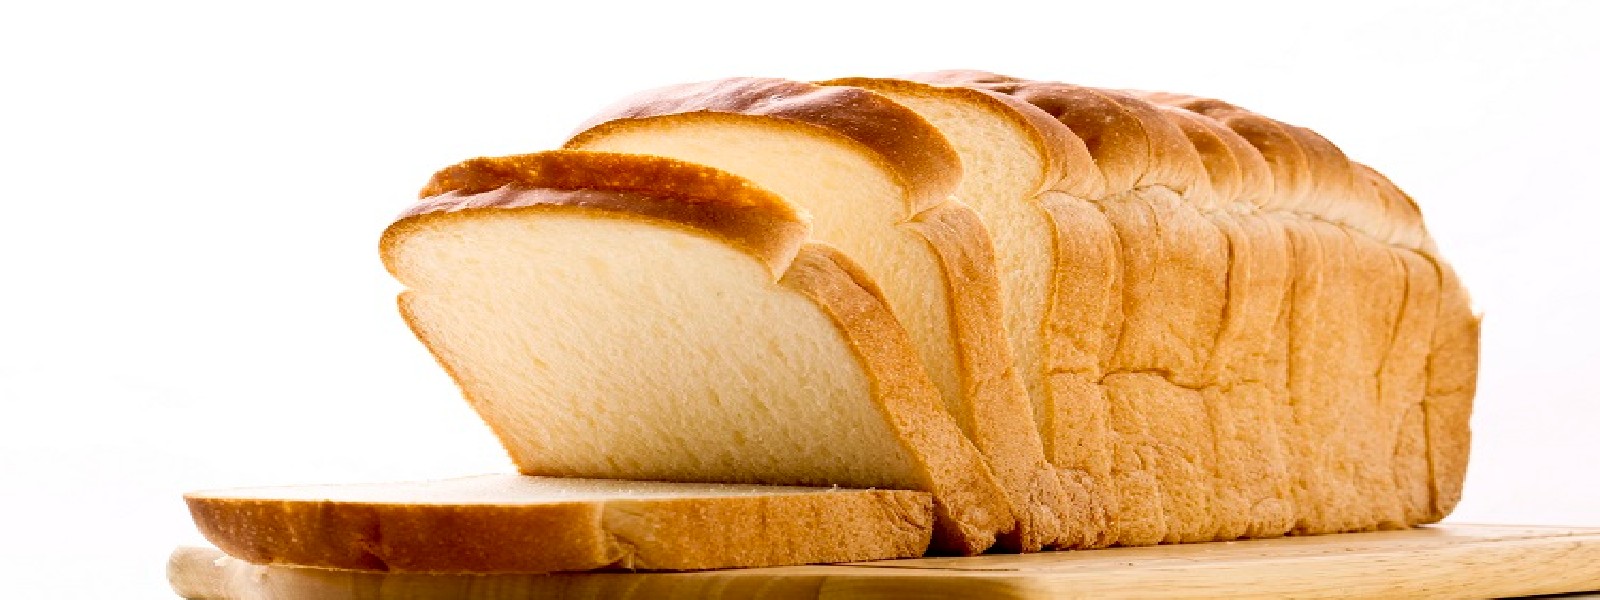 Price of a loaf of bread will be increased by Rs. 30/-